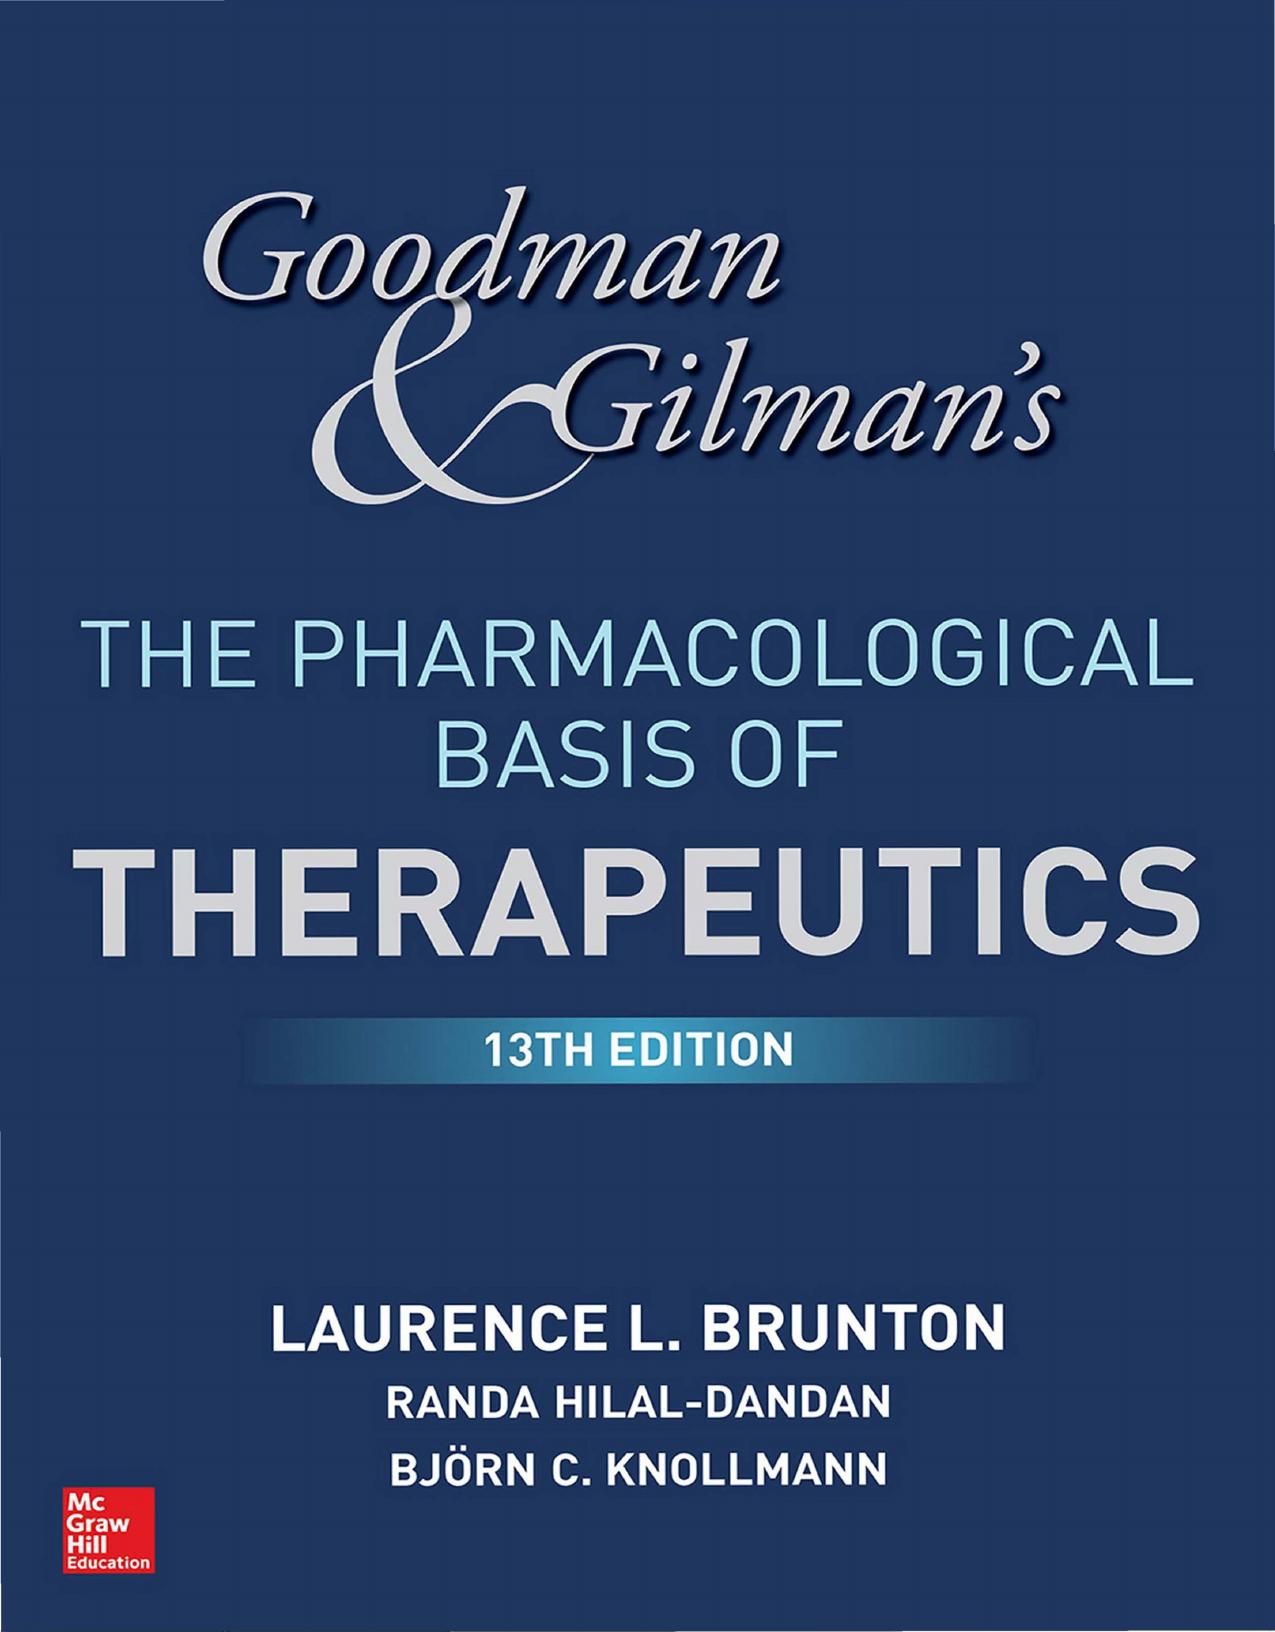 Goodman and Gilman’s The Pharmacological Basis of Therapeutics, 2018